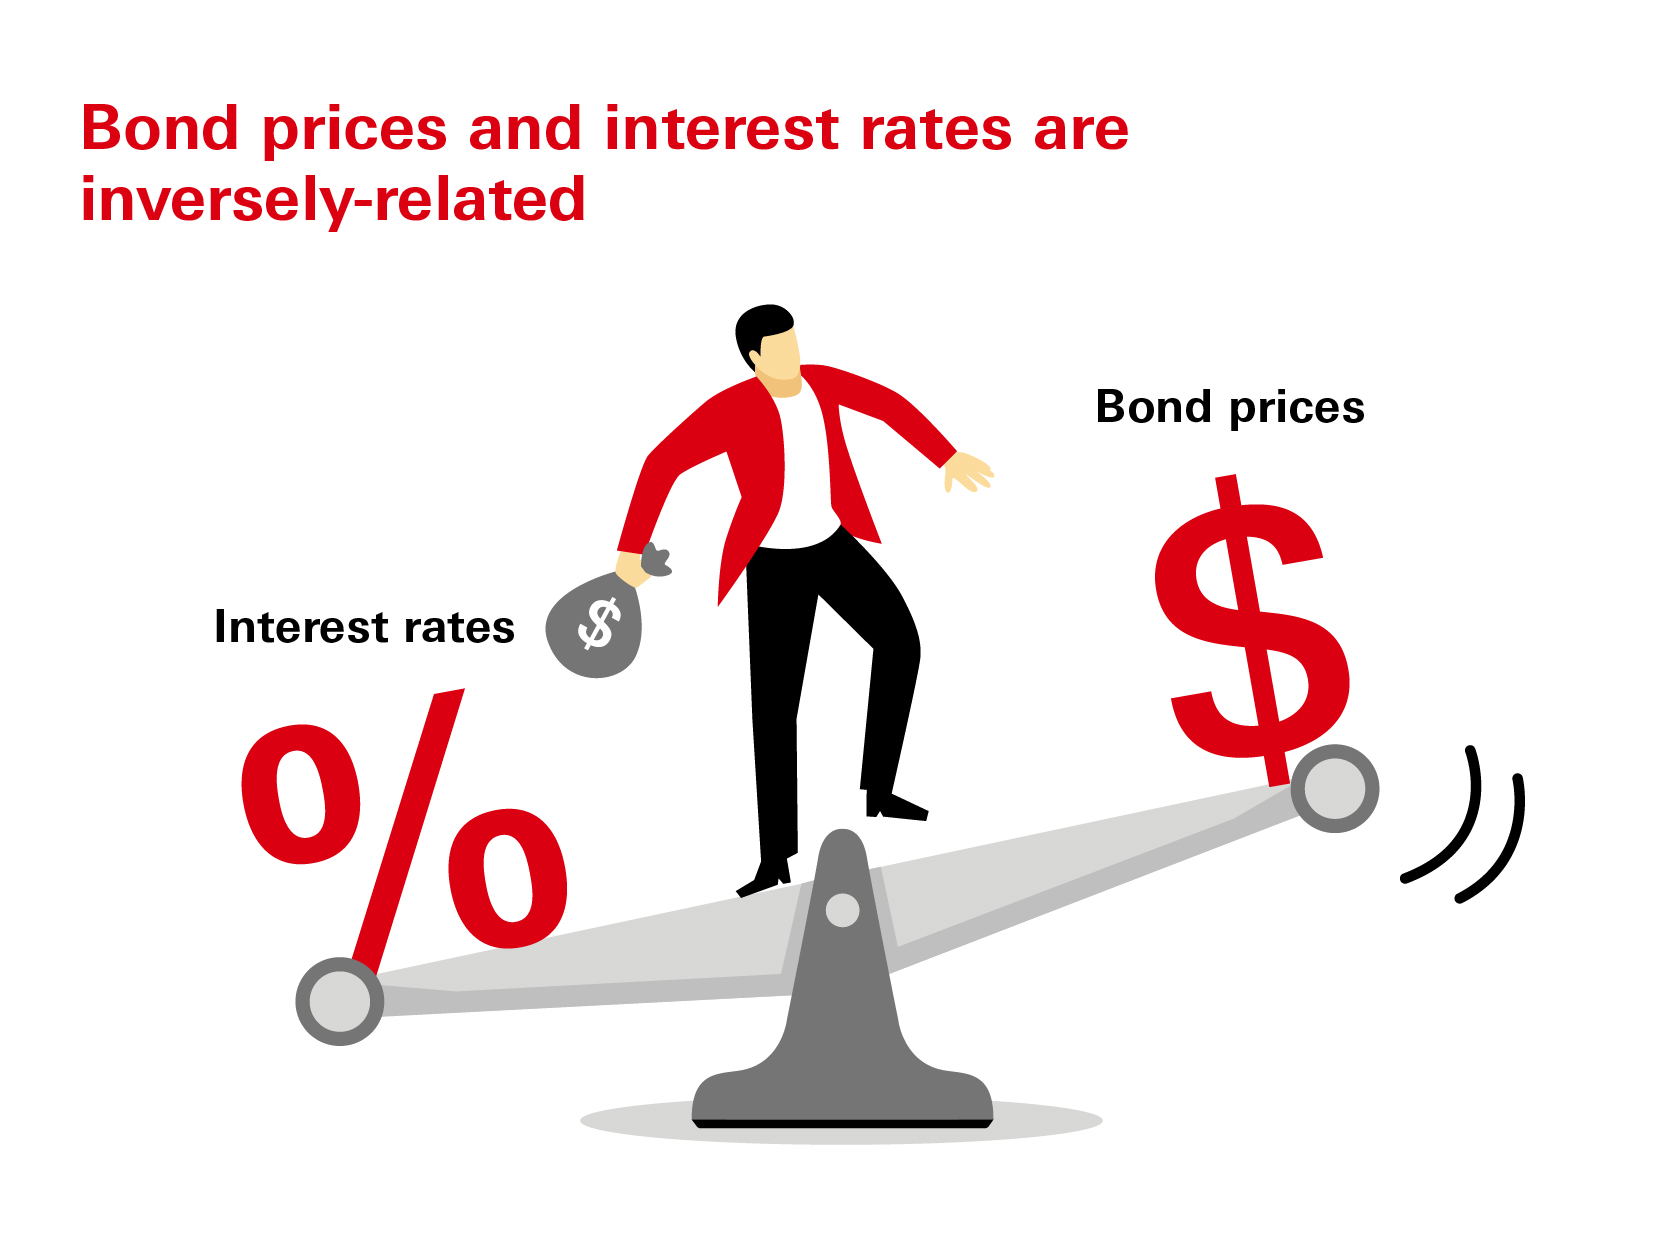 Bond prices are subject to interest rate changes - they are negatively related. That means when interest rate rises, bond price will drop.